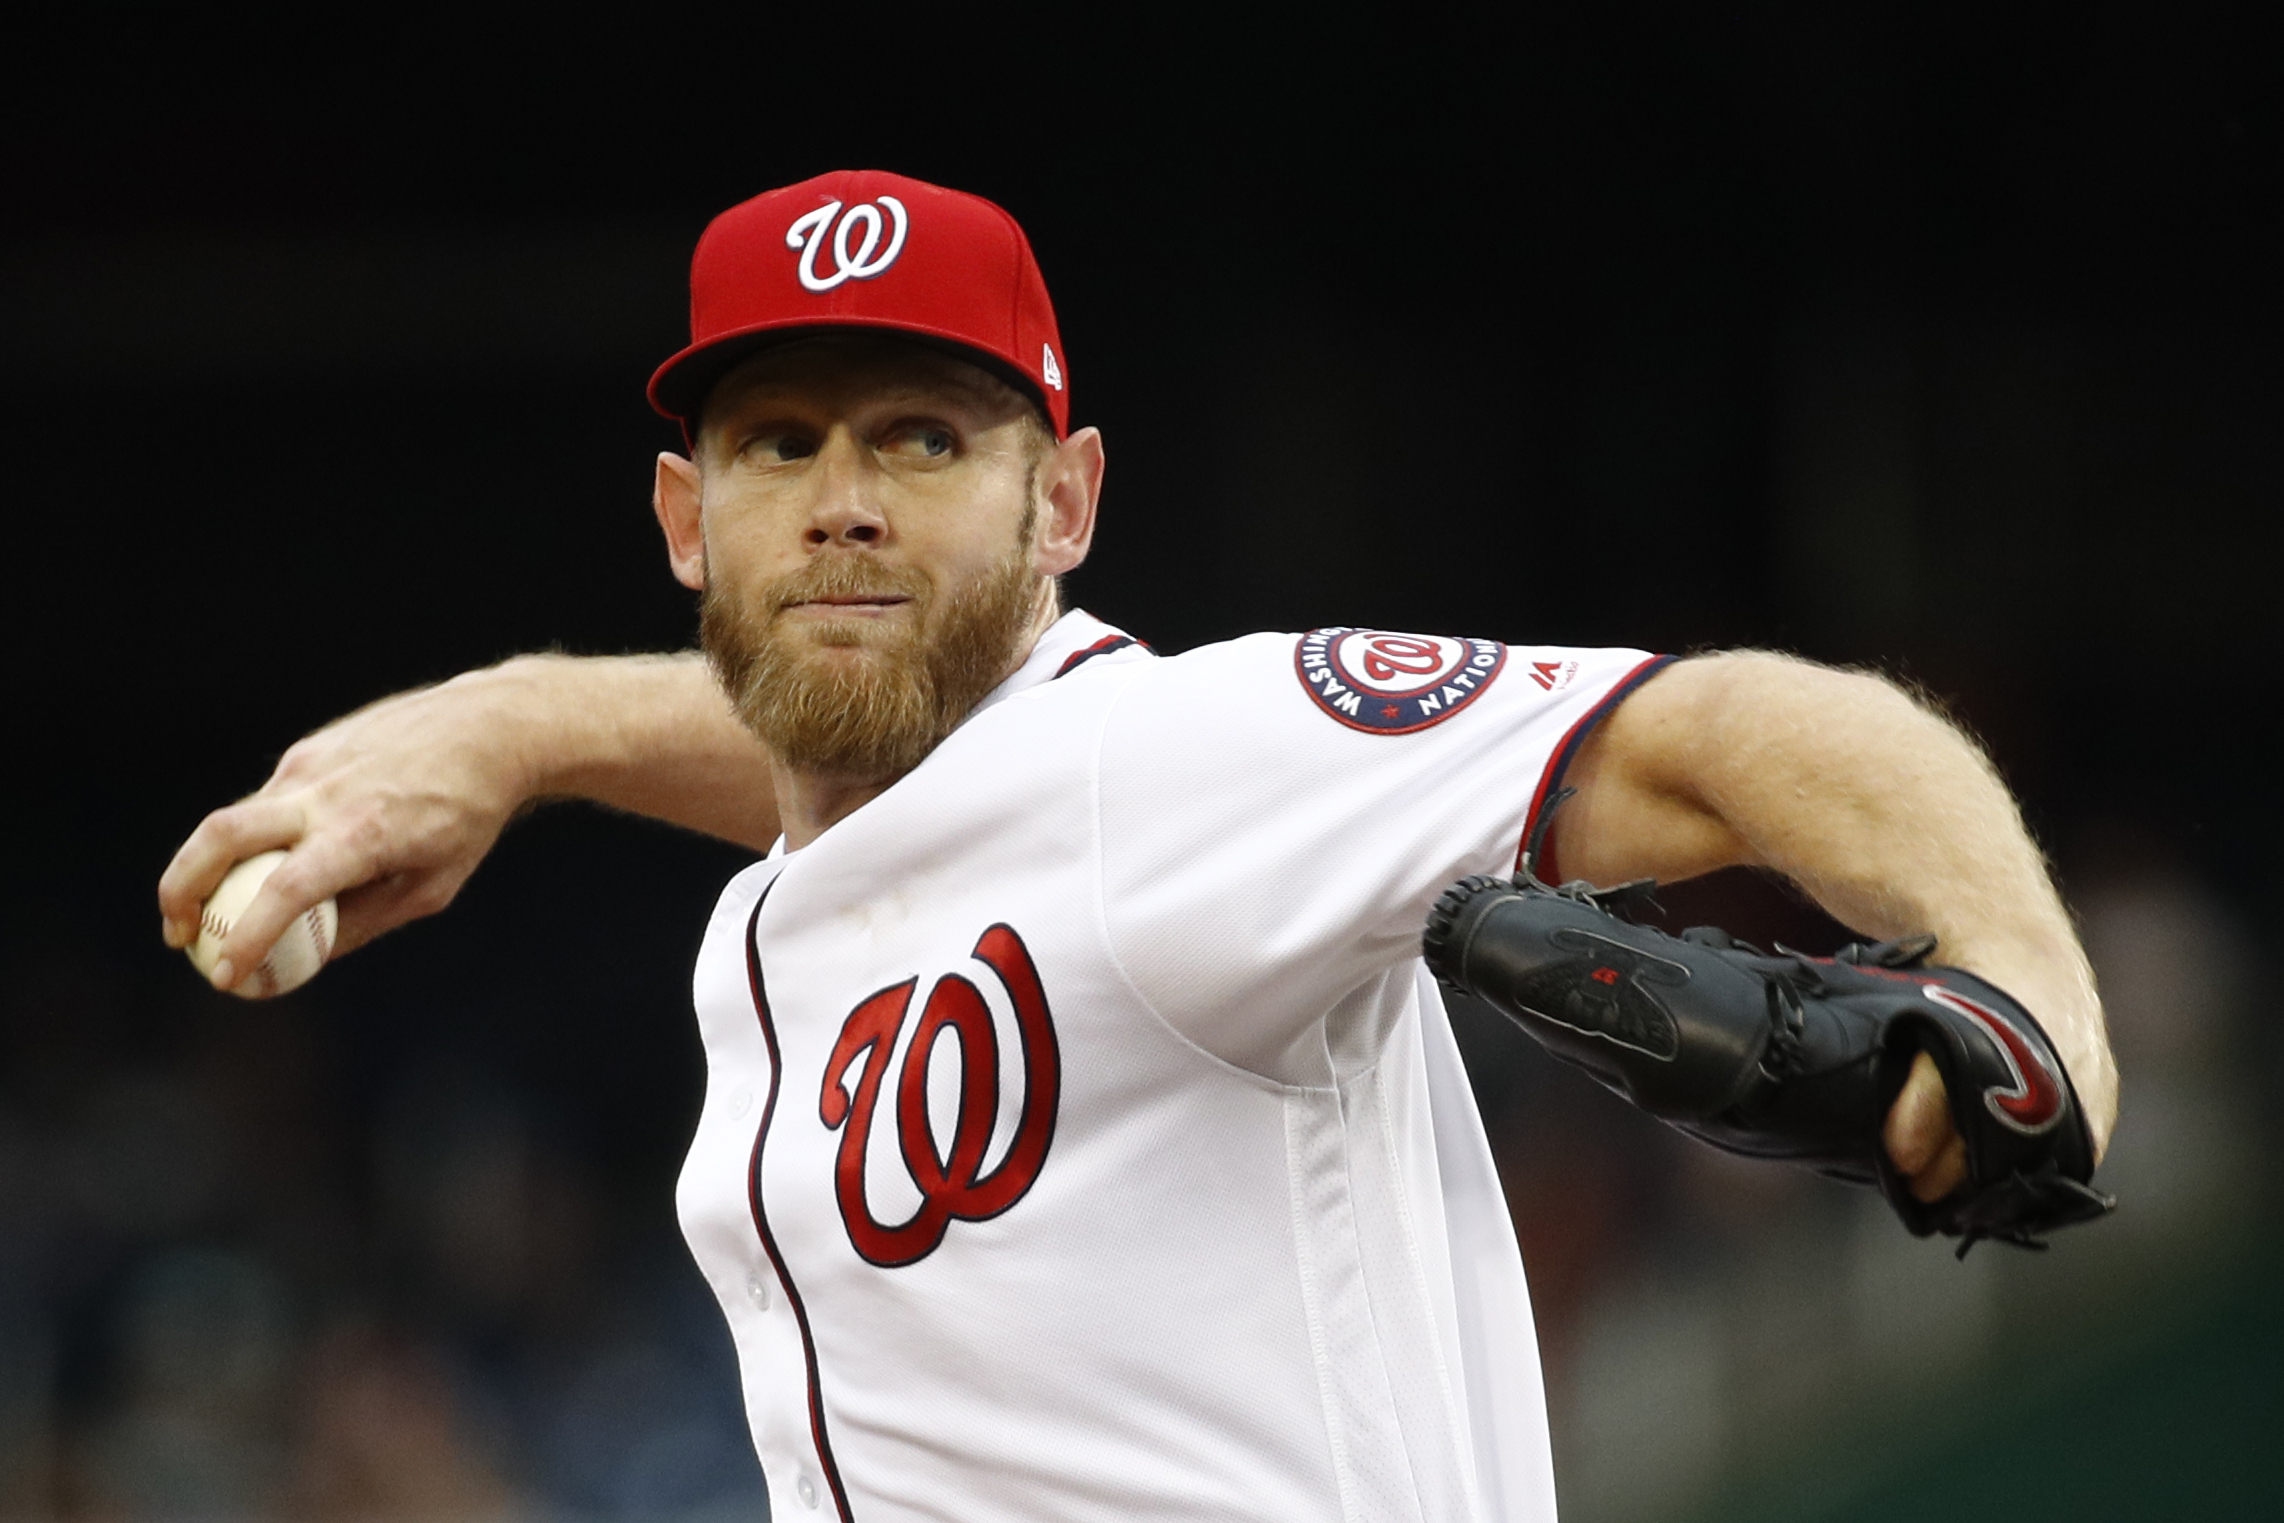 Strasburg, Nats sweep Phils in 5-game series, hold WC lead